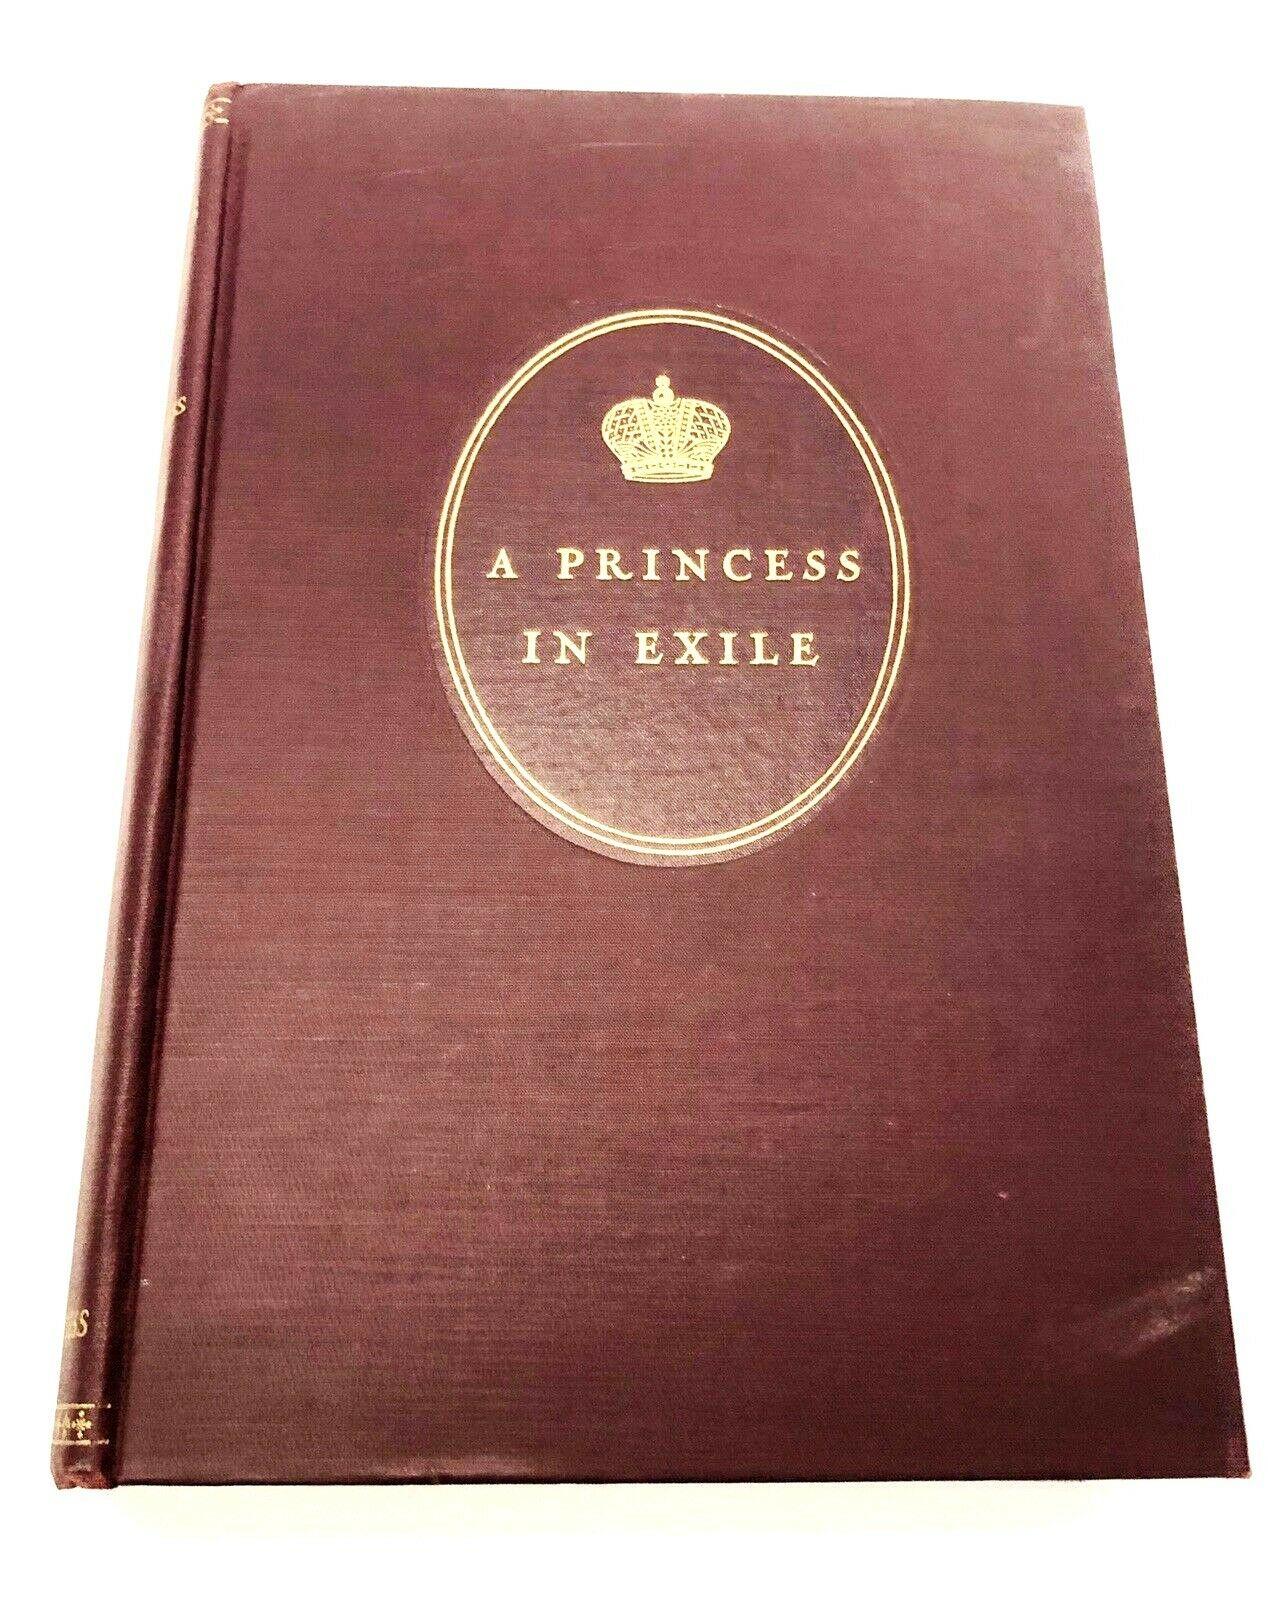 A PRINCESS IN EXILE by Marie, Grand Duchess of Russia (1932)